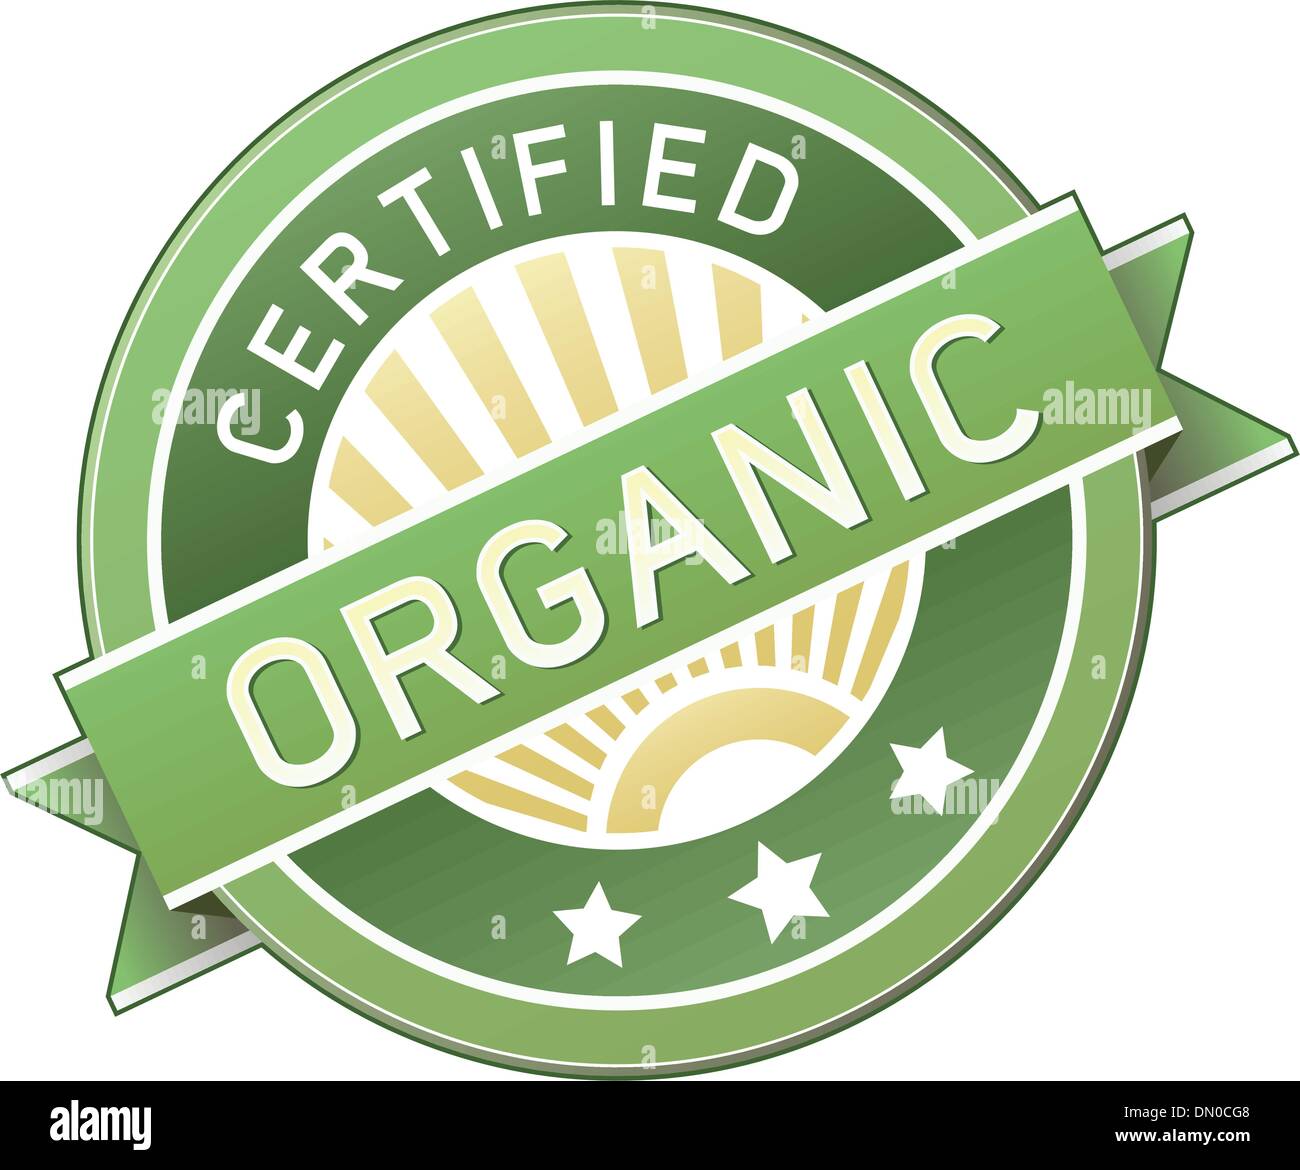 Certified organic food or product label Stock Vector